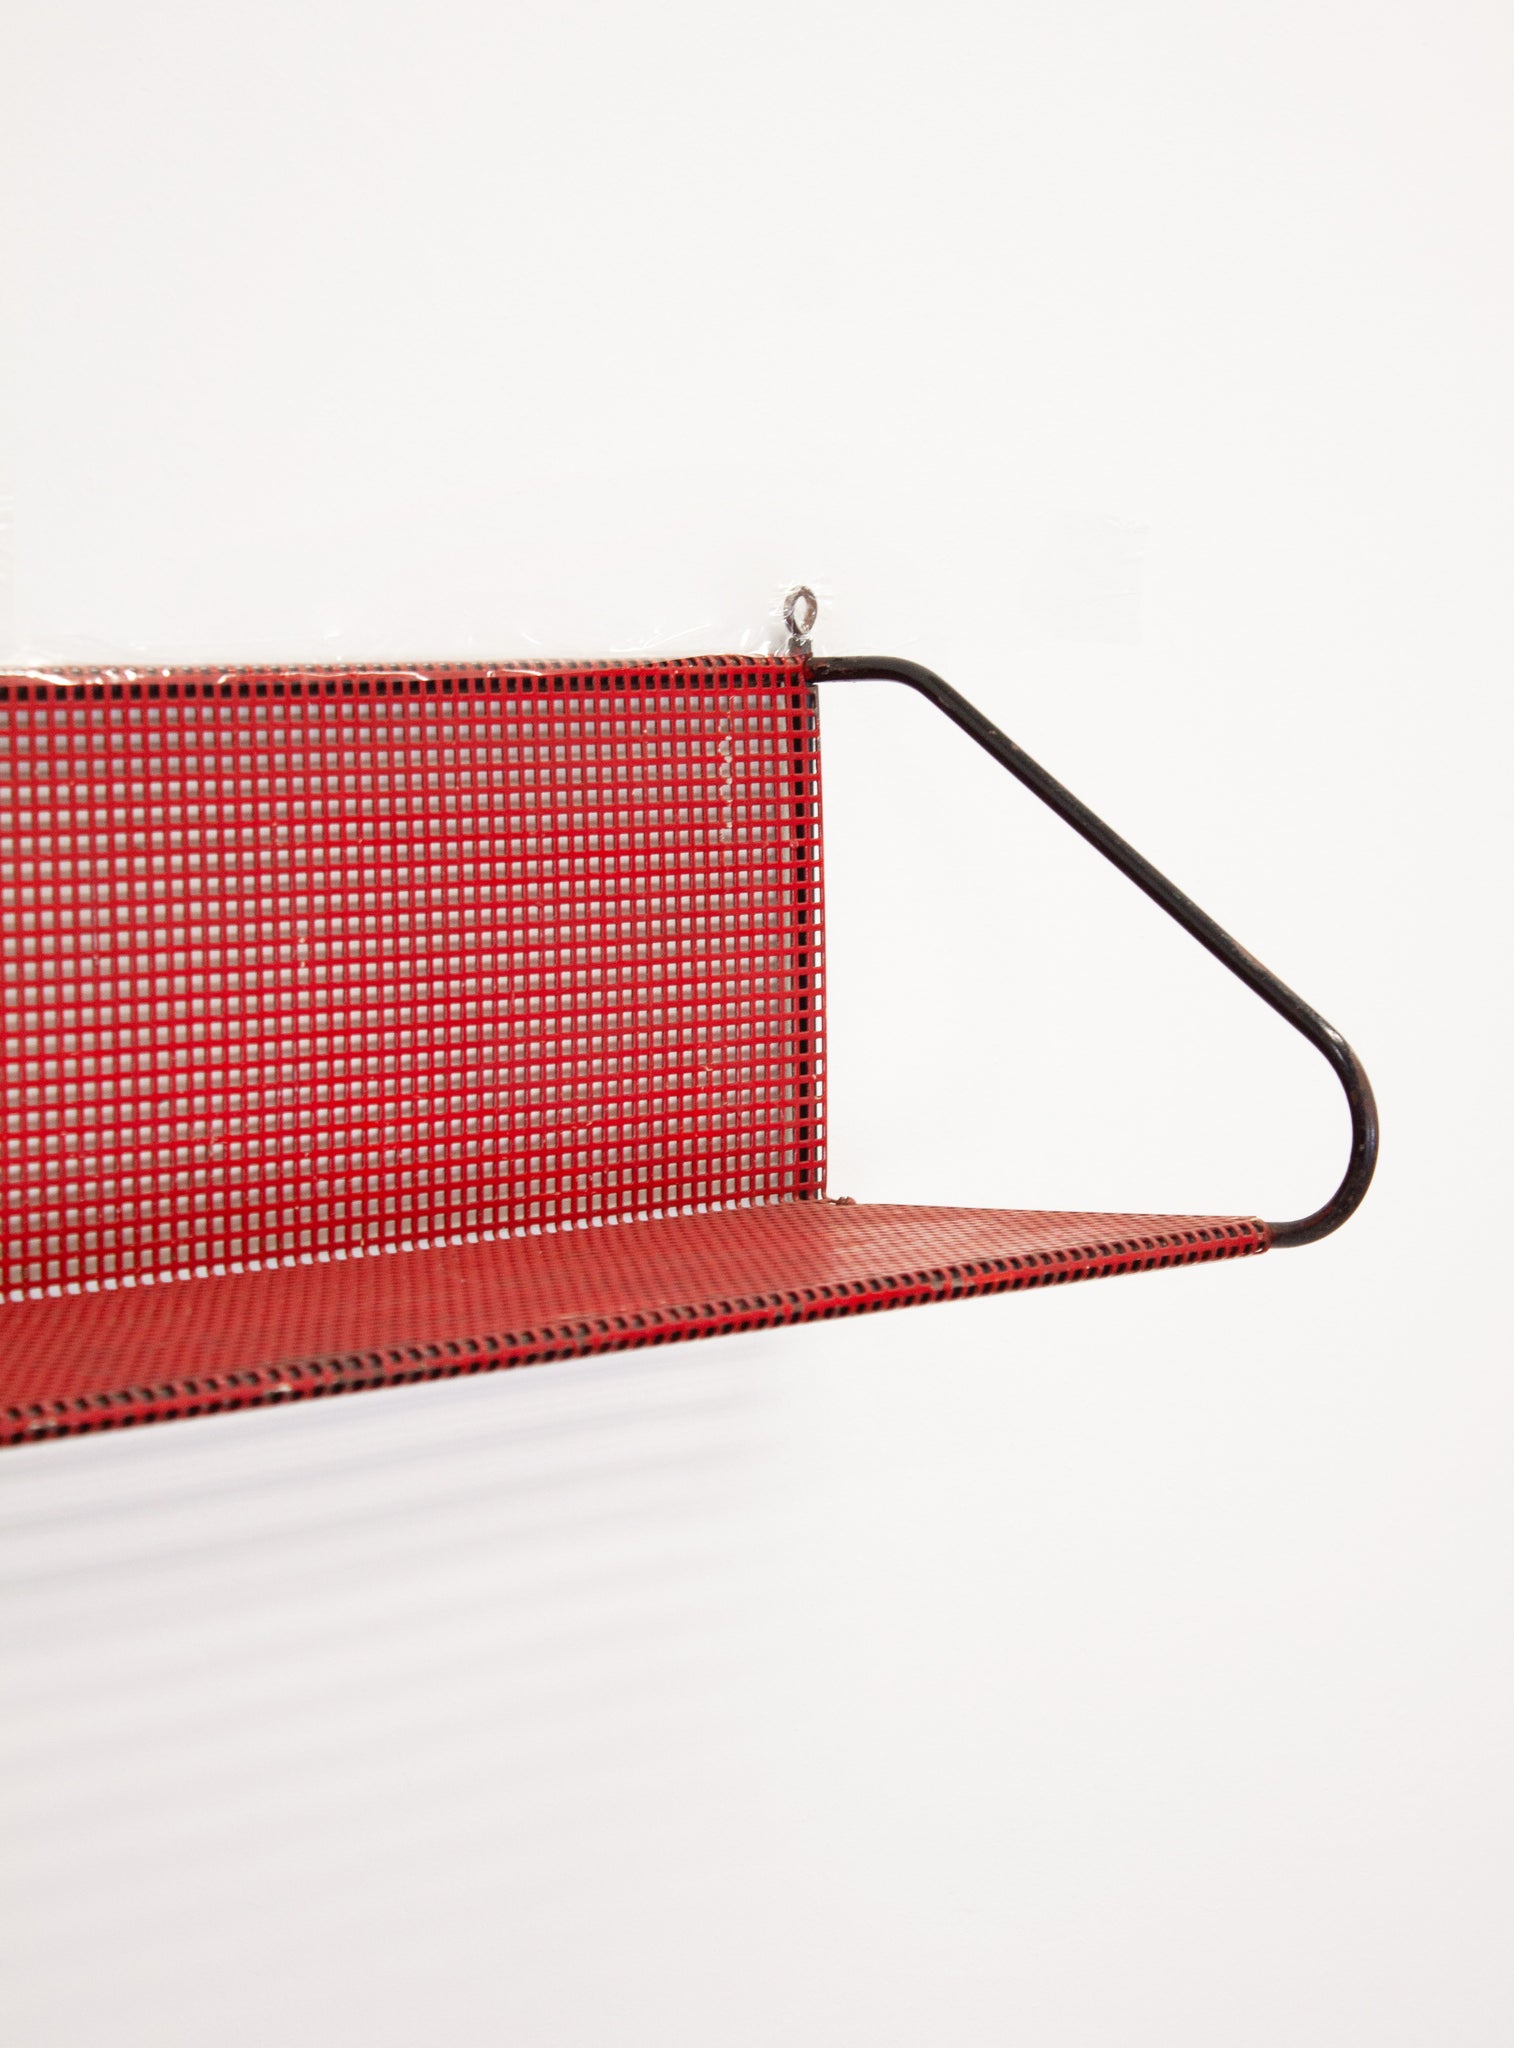 Pilastro Perforated Metal Wall Shelf (Red)